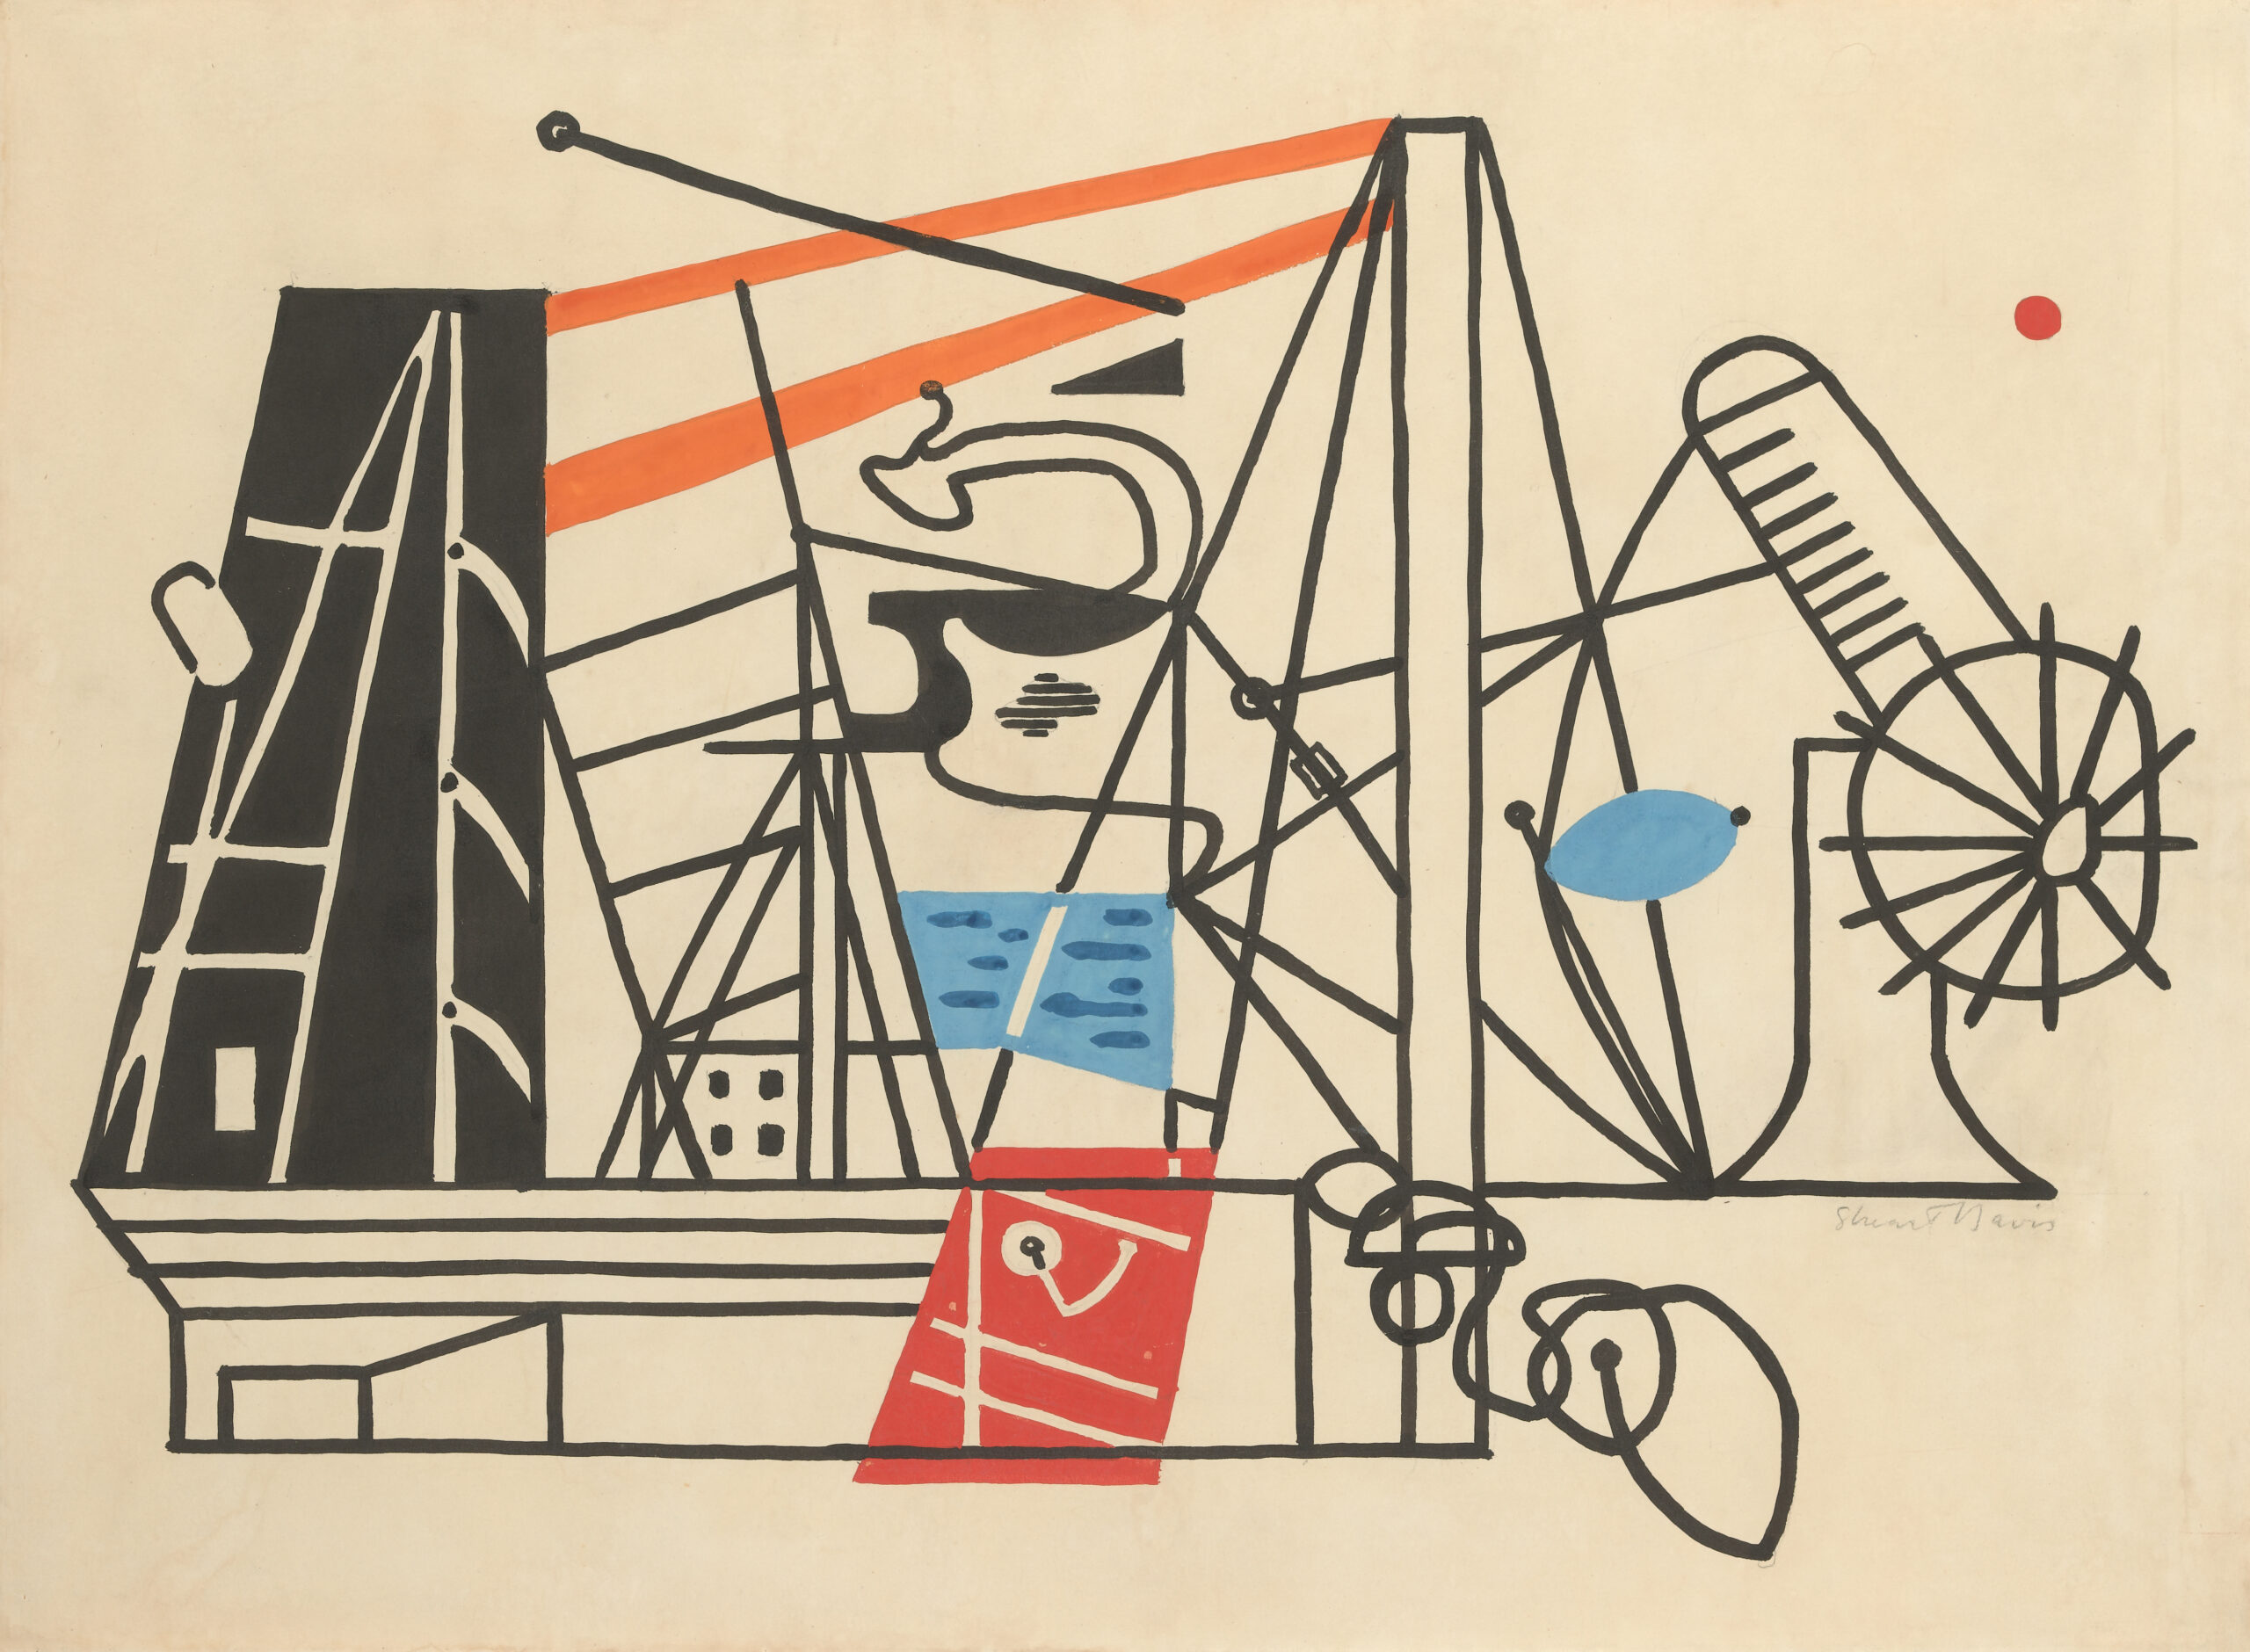 Multiple views of a ship mast and nautical imagery primarily in black and white with red, blue and orange accents.